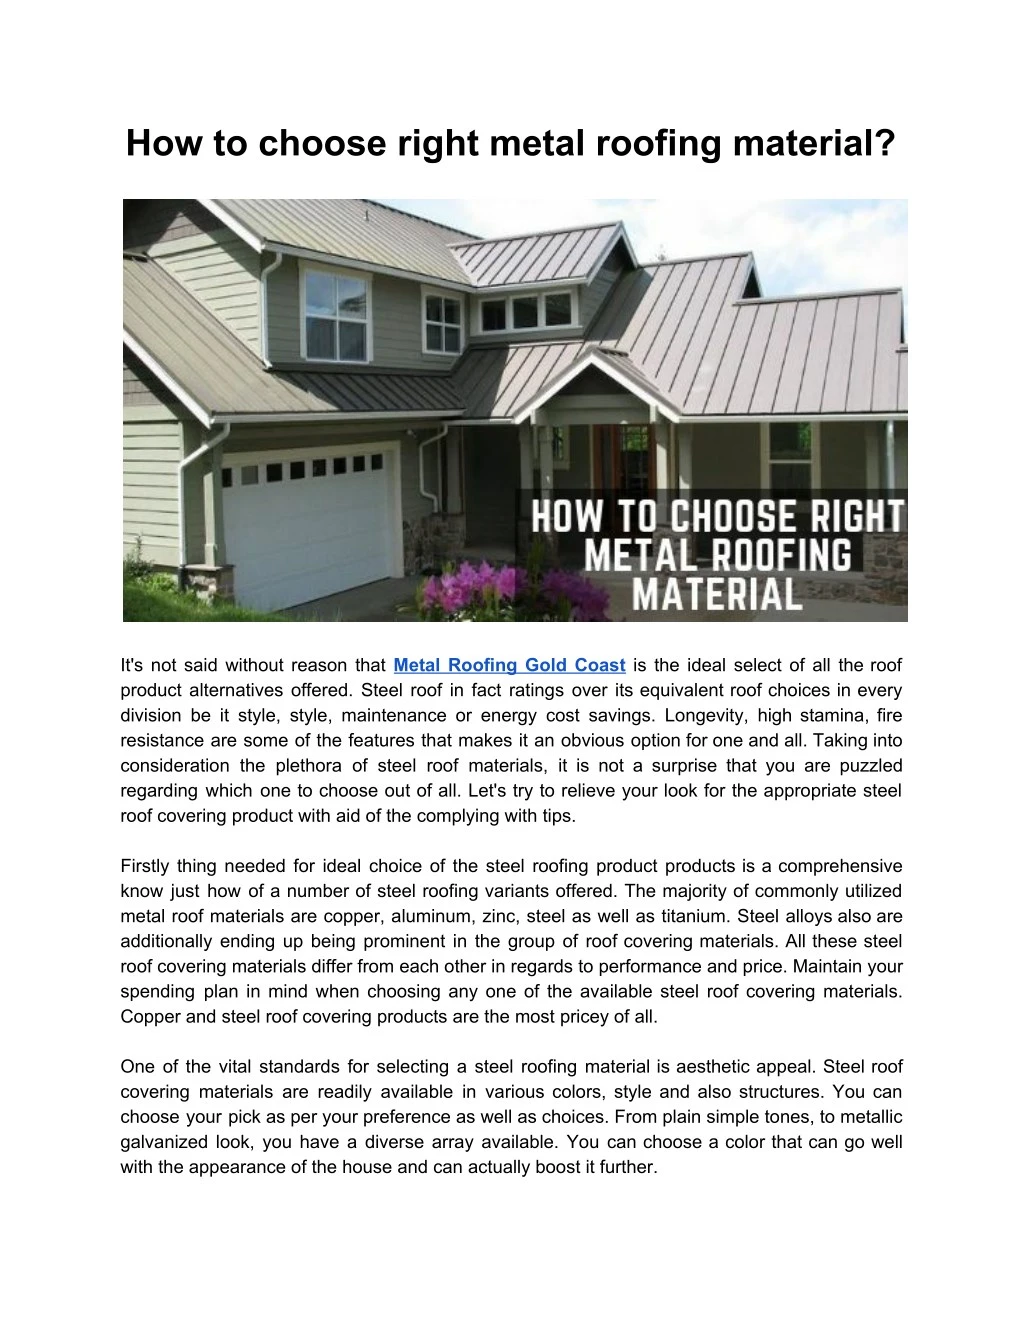 how to choose right metal roofing material